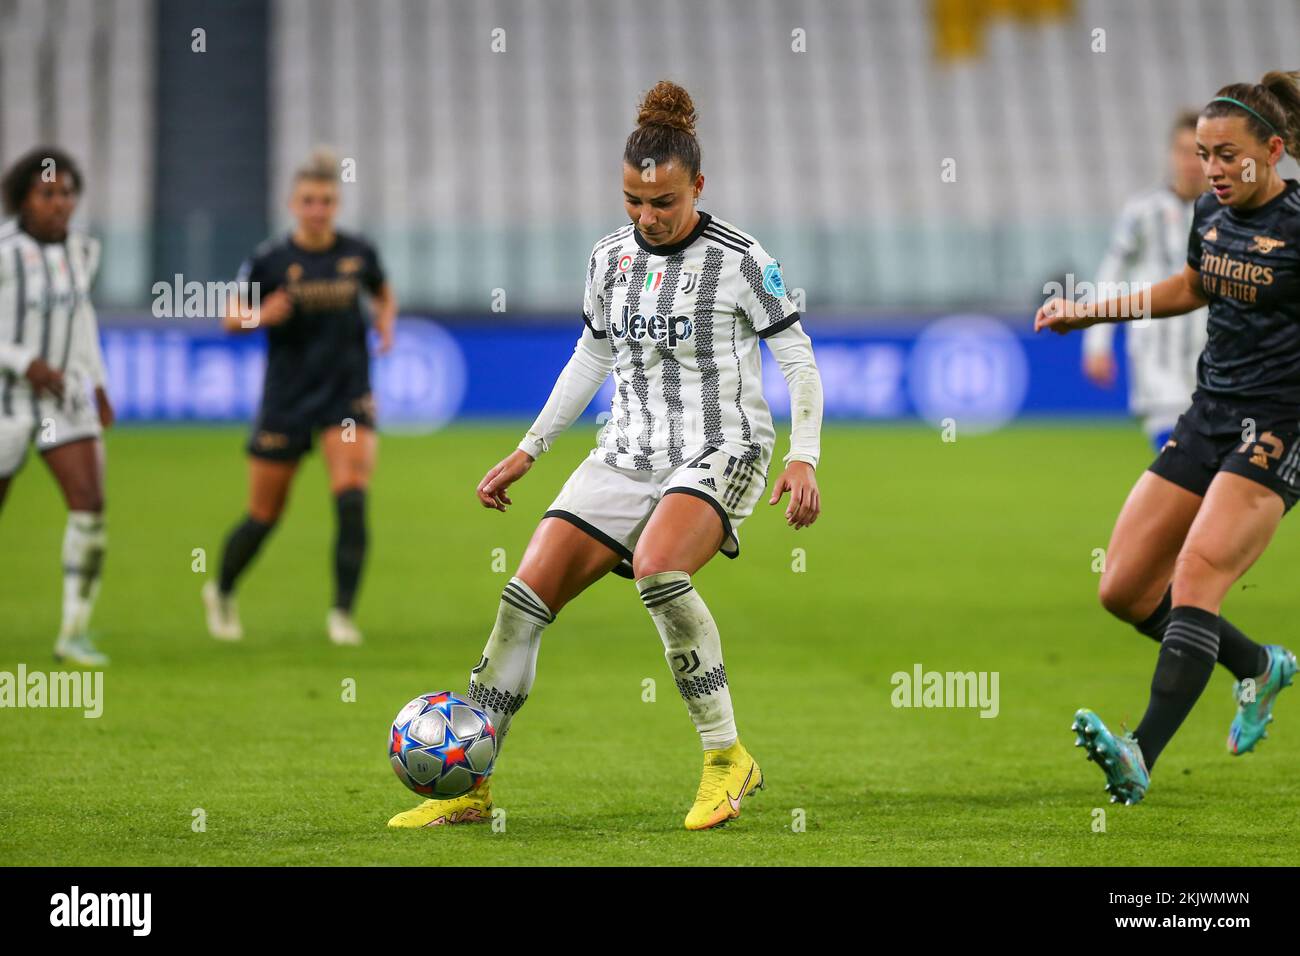 TURIN, ITALY, 24 NOVEMBER 2022. Arianna Caruso of Juventus Women  during the UWCL match (Group C) between Juventus Women FC and Arsenal Women FC on November 24, 2022 at Allianz Stadium in Turin, Italy.  Credit: Massimiliano Ferraro/Alamy Live News Stock Photo